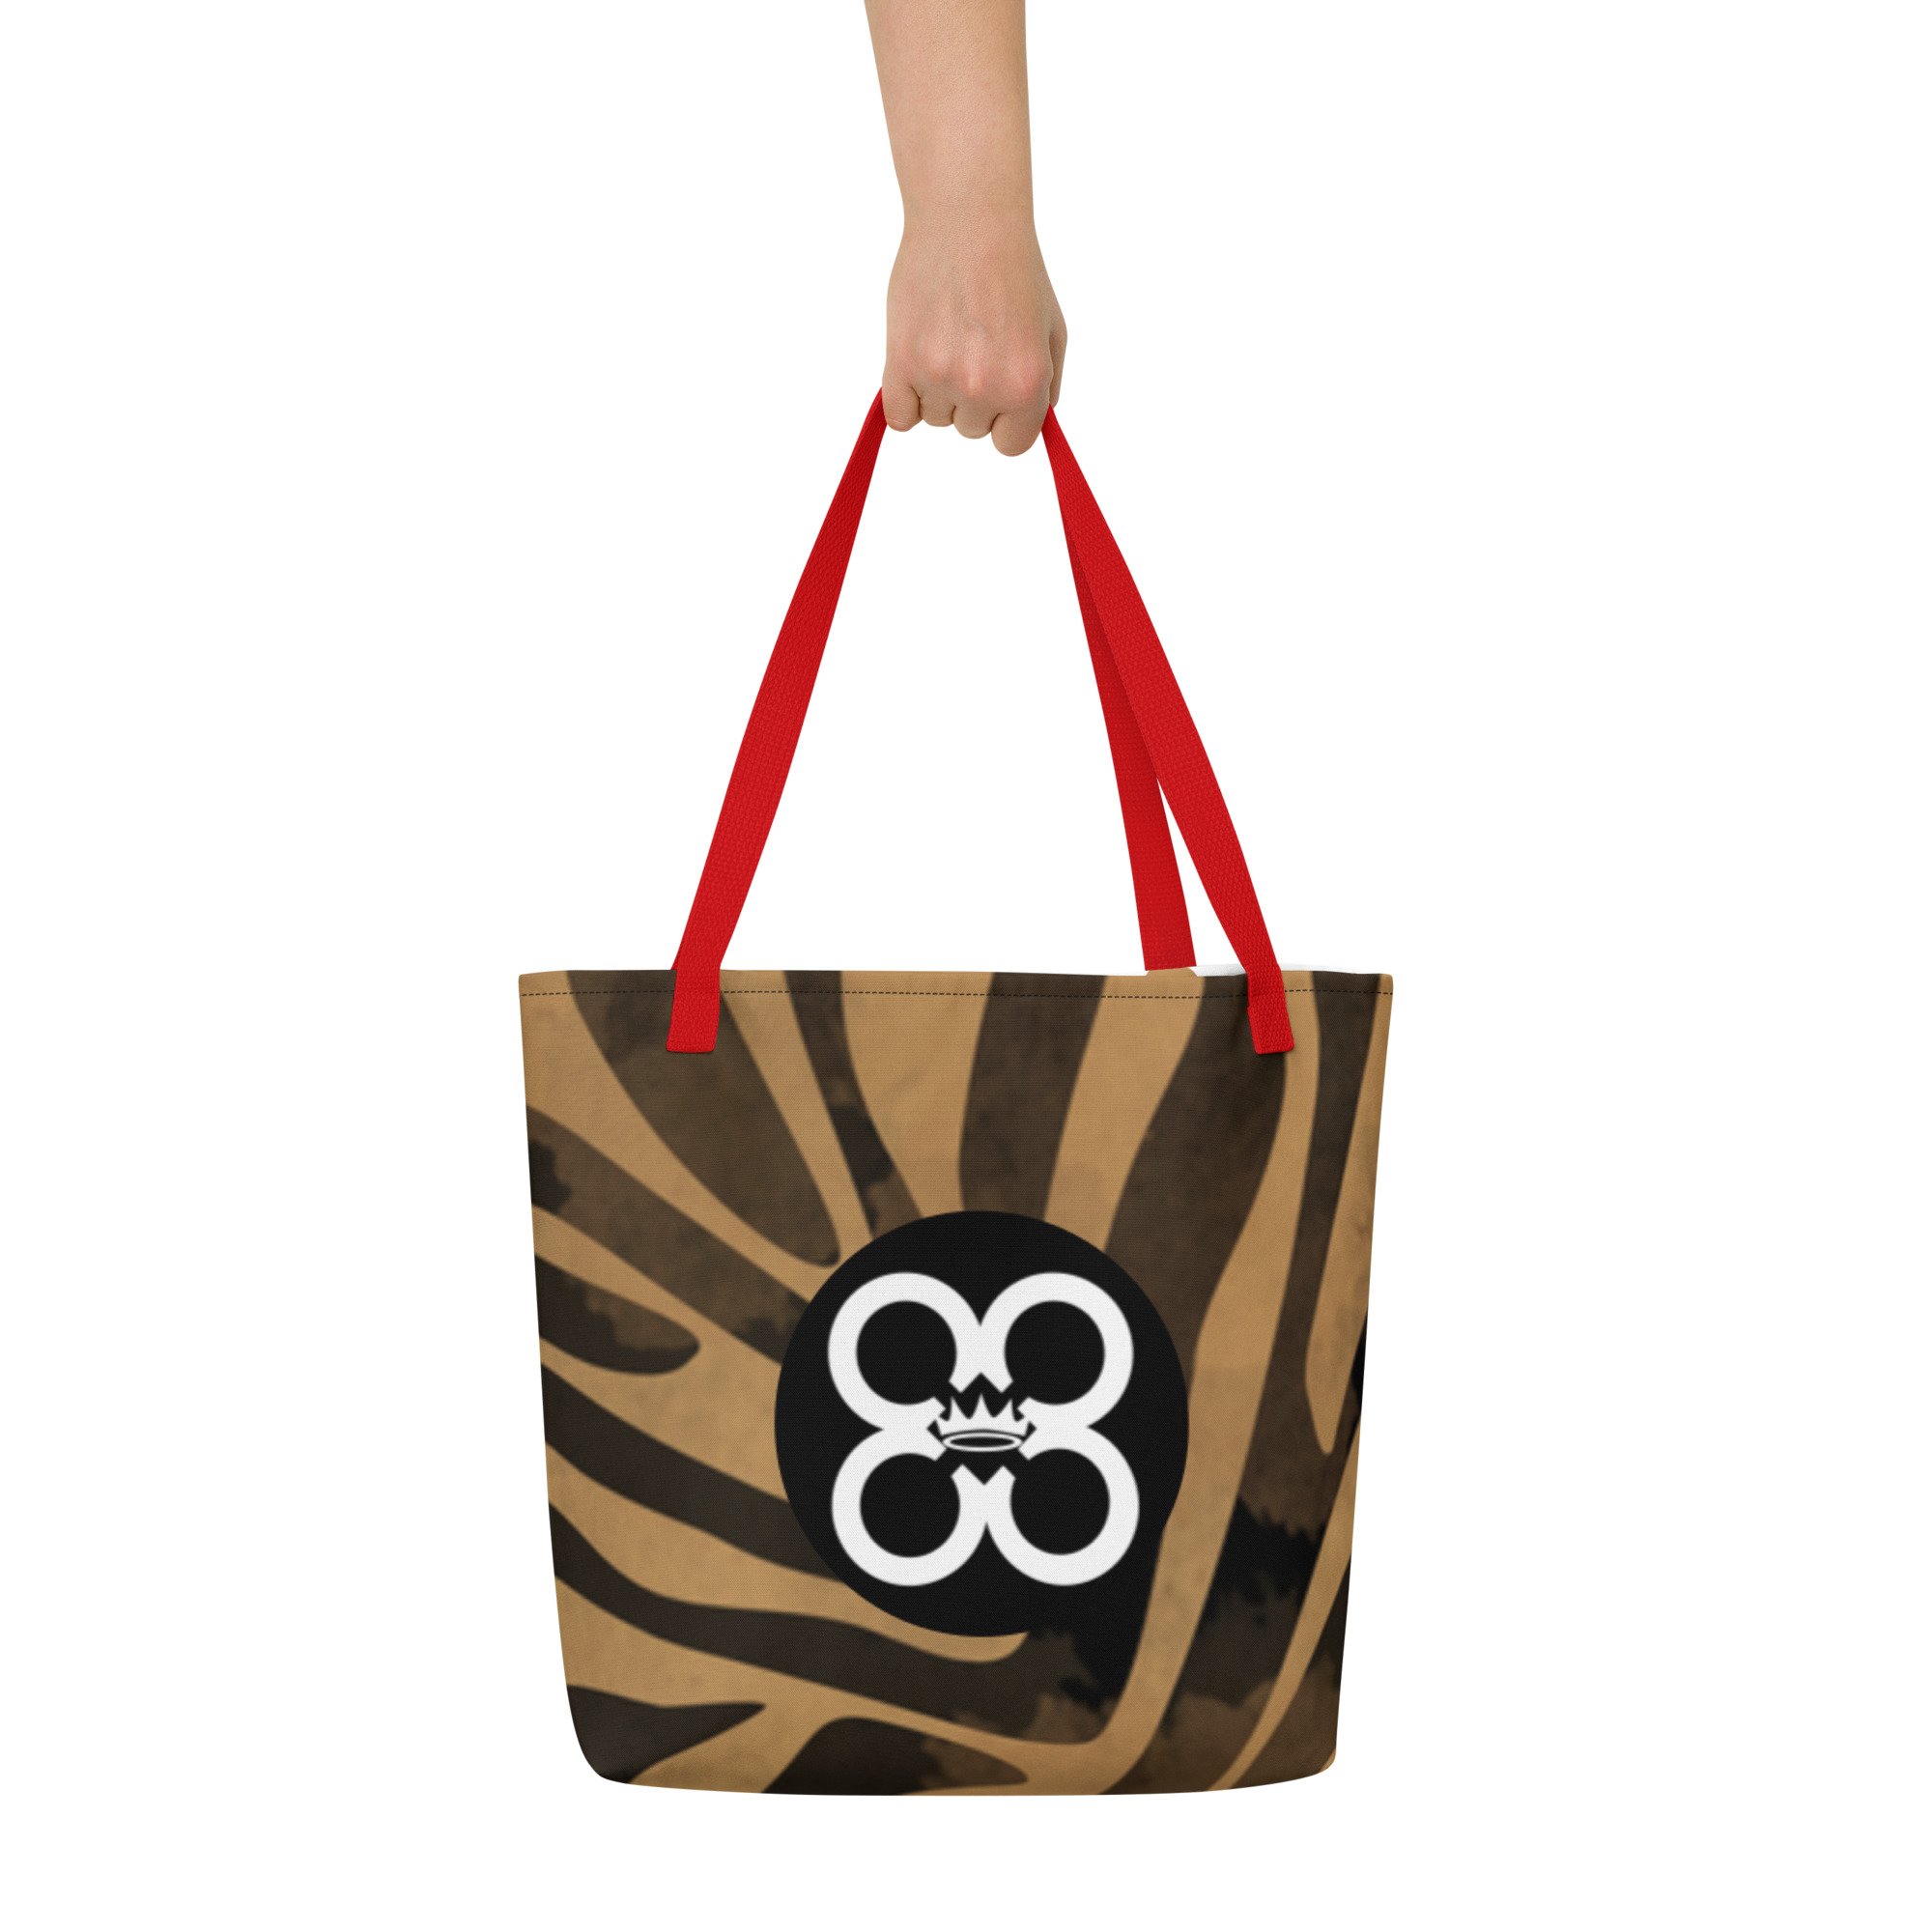 all-over-print-large-tote-bag-w-pocket-red-front-62aca5edd8e11.jpg